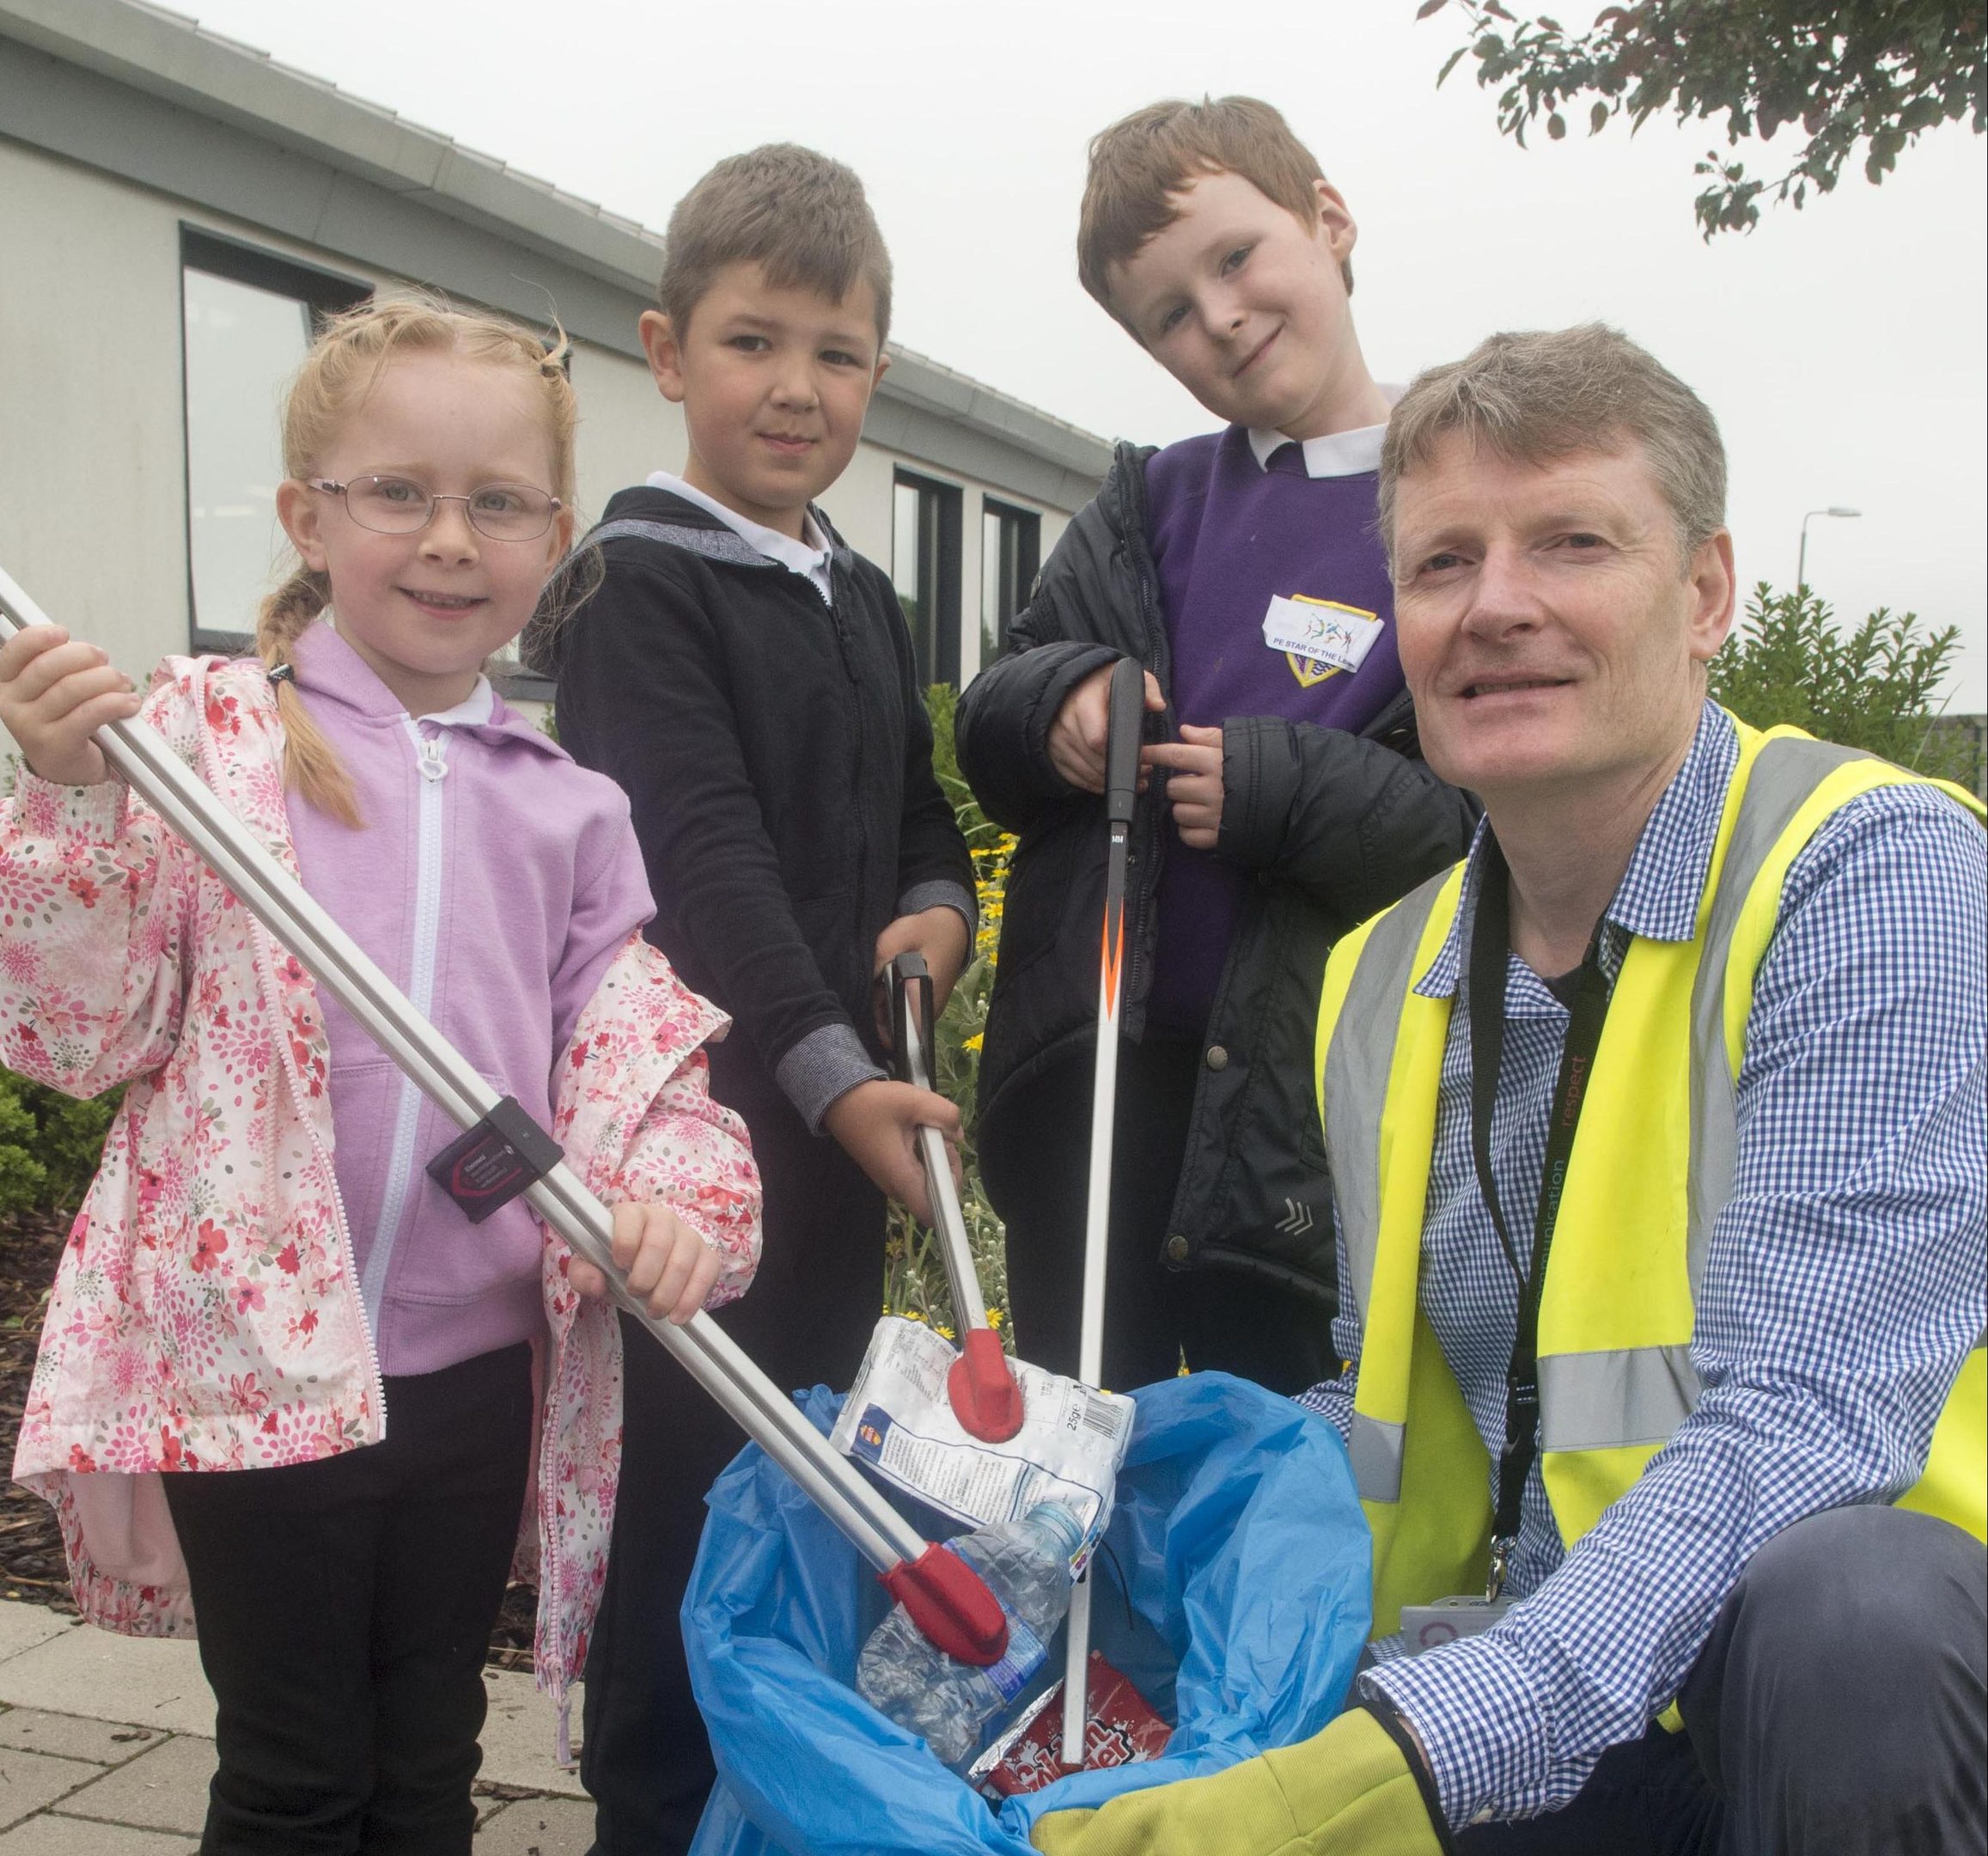 22/06/17 Envirnmental manager STEVEN SHAW with- Lucie Morrice (7YO), Max Dryburgh (6YO), Alex Scott (7YO) all primary 2-

Hundreds of community-spirited folk are today (22 June) taking part in a 24-hour Glitterpick in 24 places around the city.The litter pick event, which has been organised by Aberdeen City Council’s environmental team and involves schools and community groups, is designed to help make the city sparkle more in the summer months.